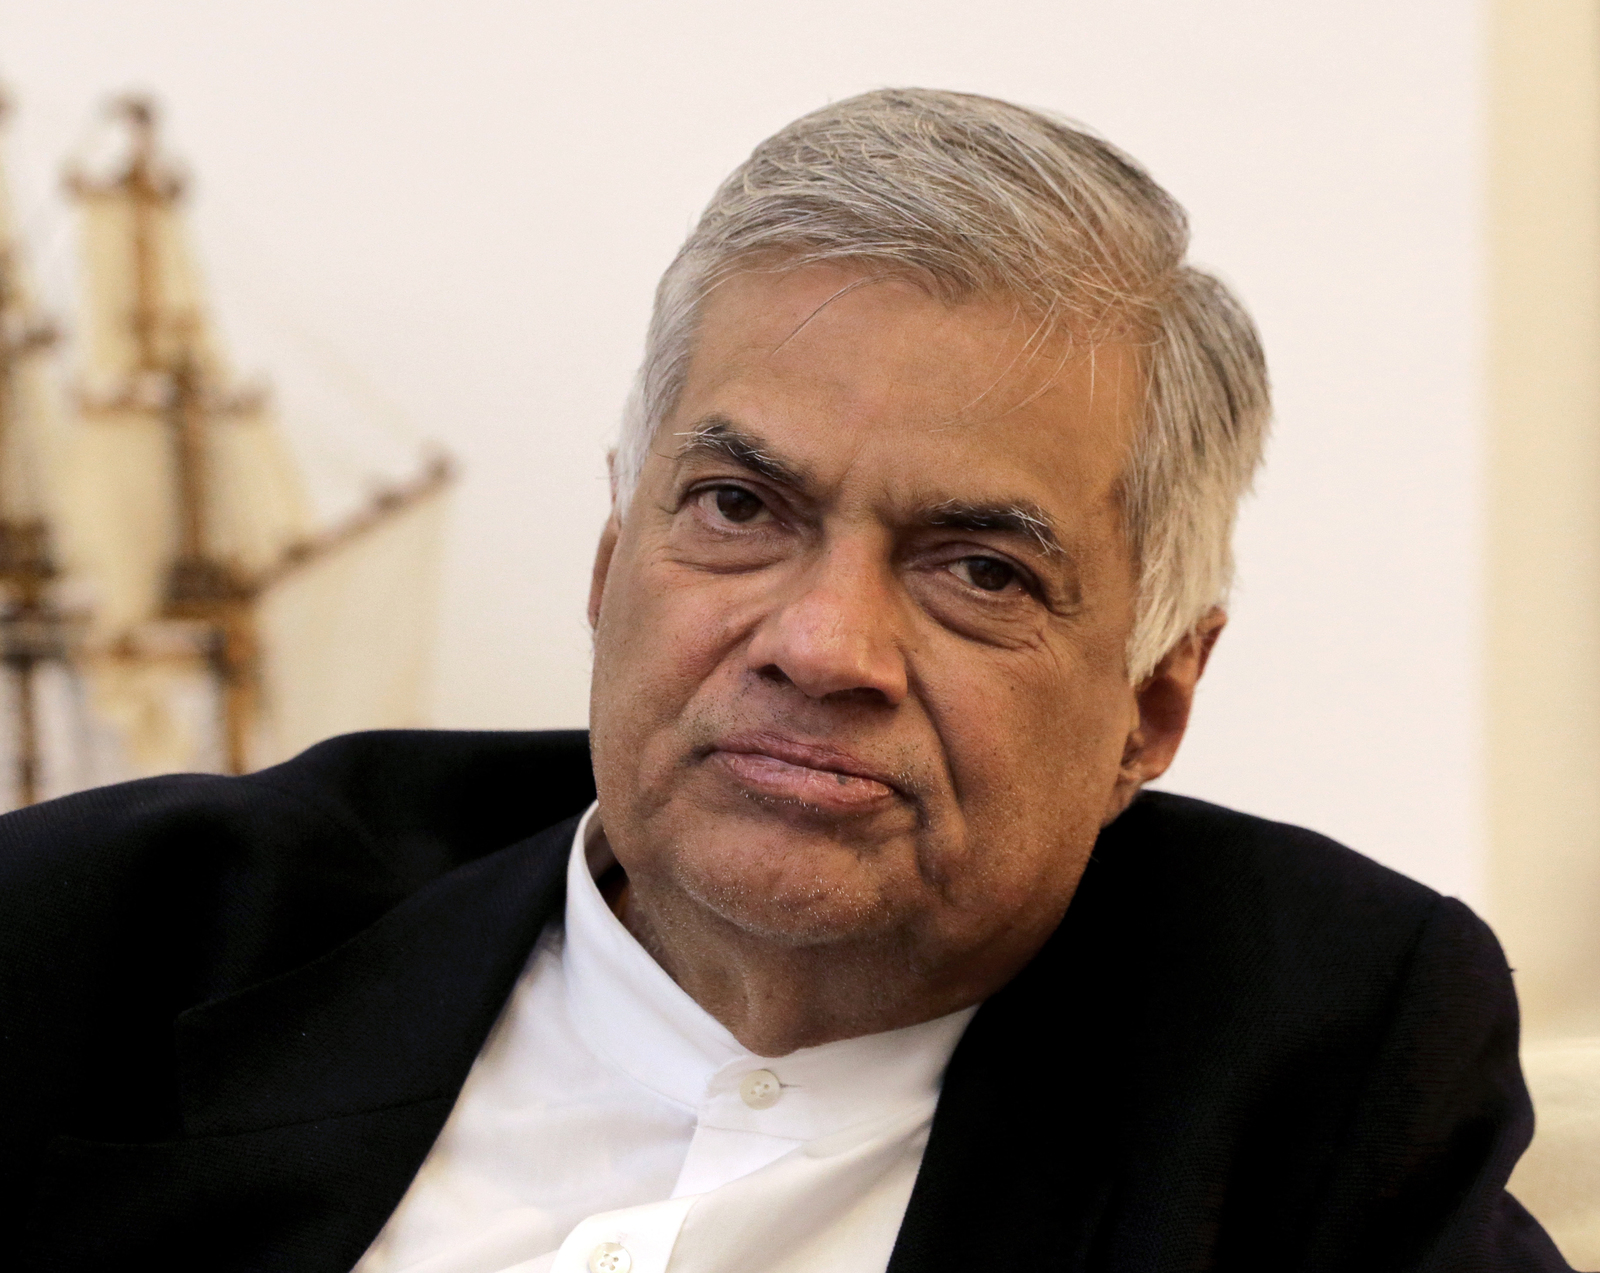 sri-lankan-leader-takes-reinstated-pm-to-task-cleburne-times-review-3.jpg